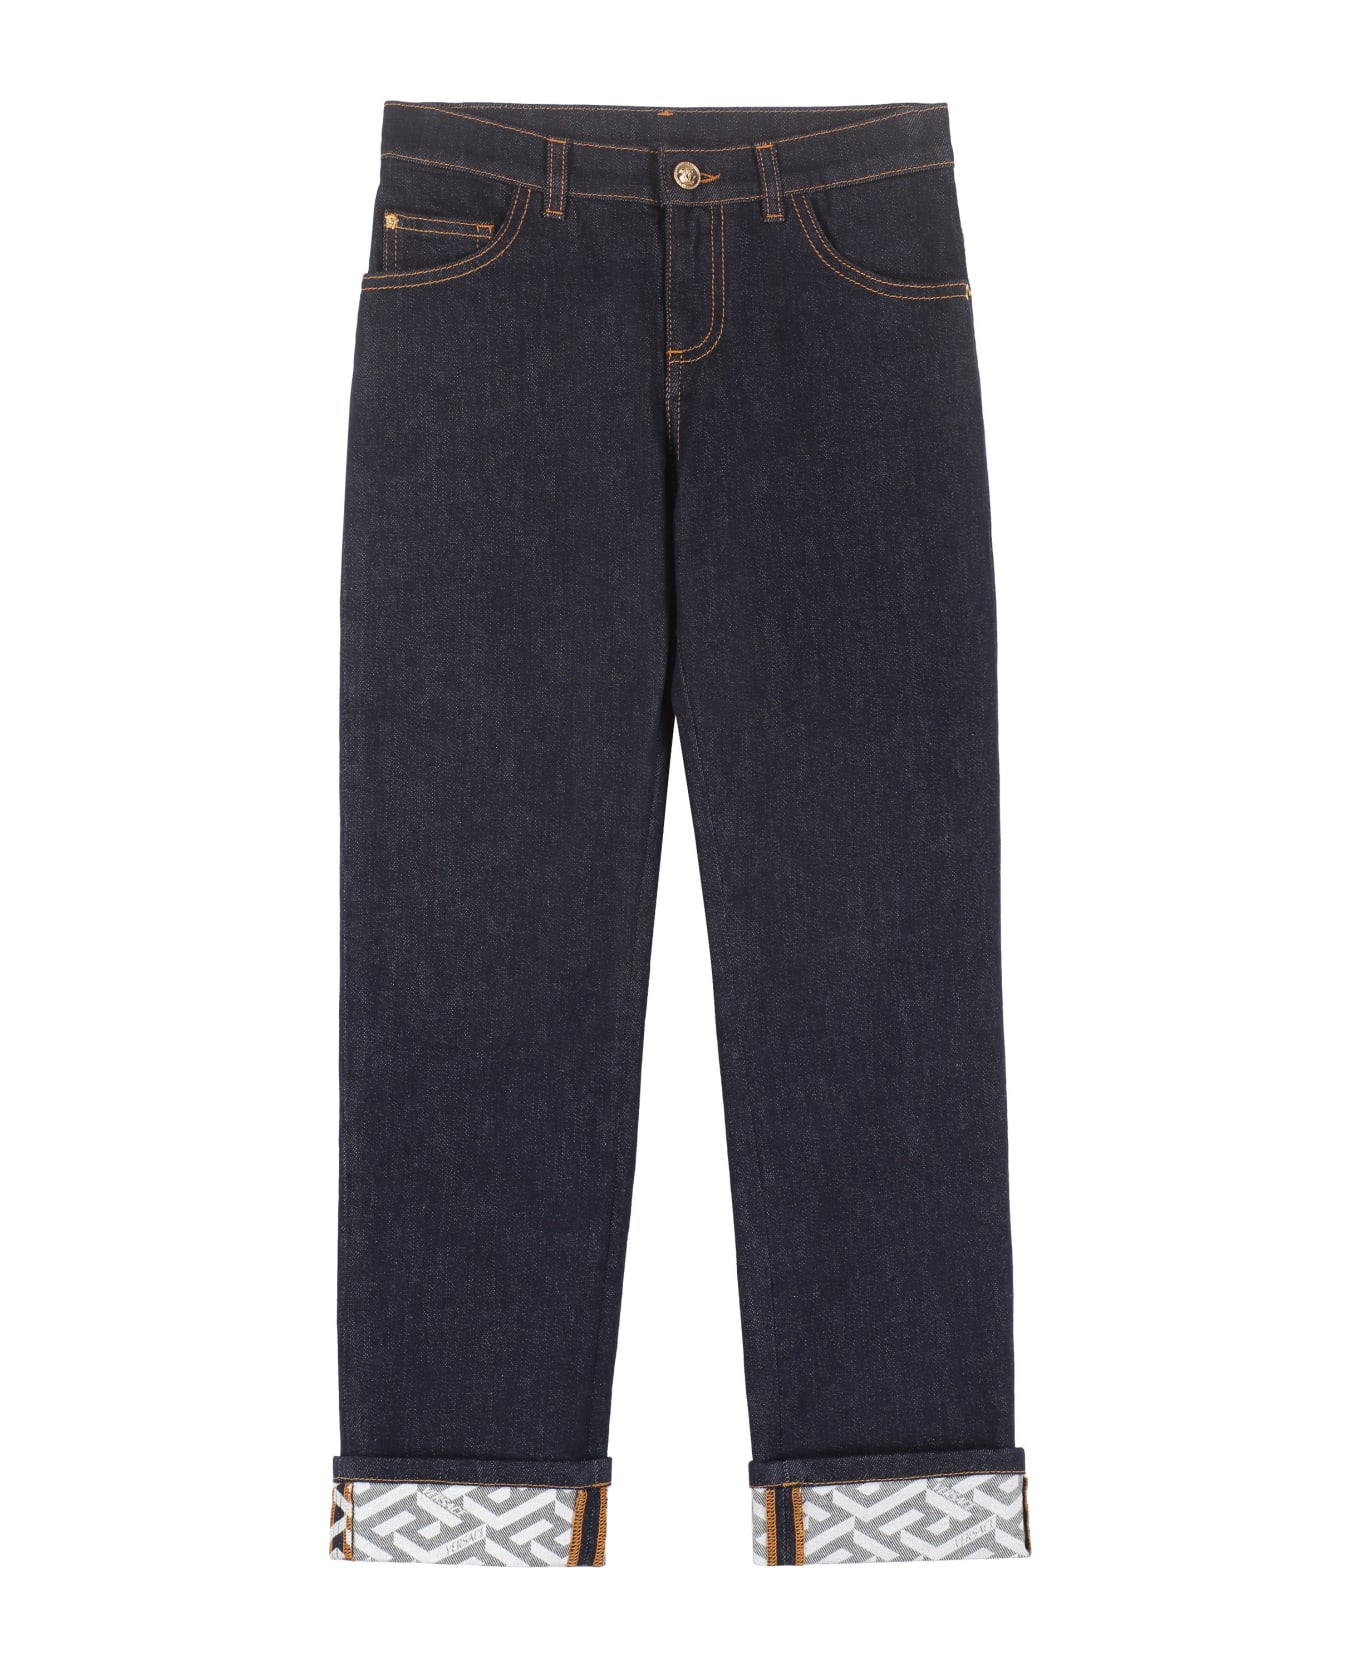 Young Versace Slim Fit Jeans - Denim ボトムス